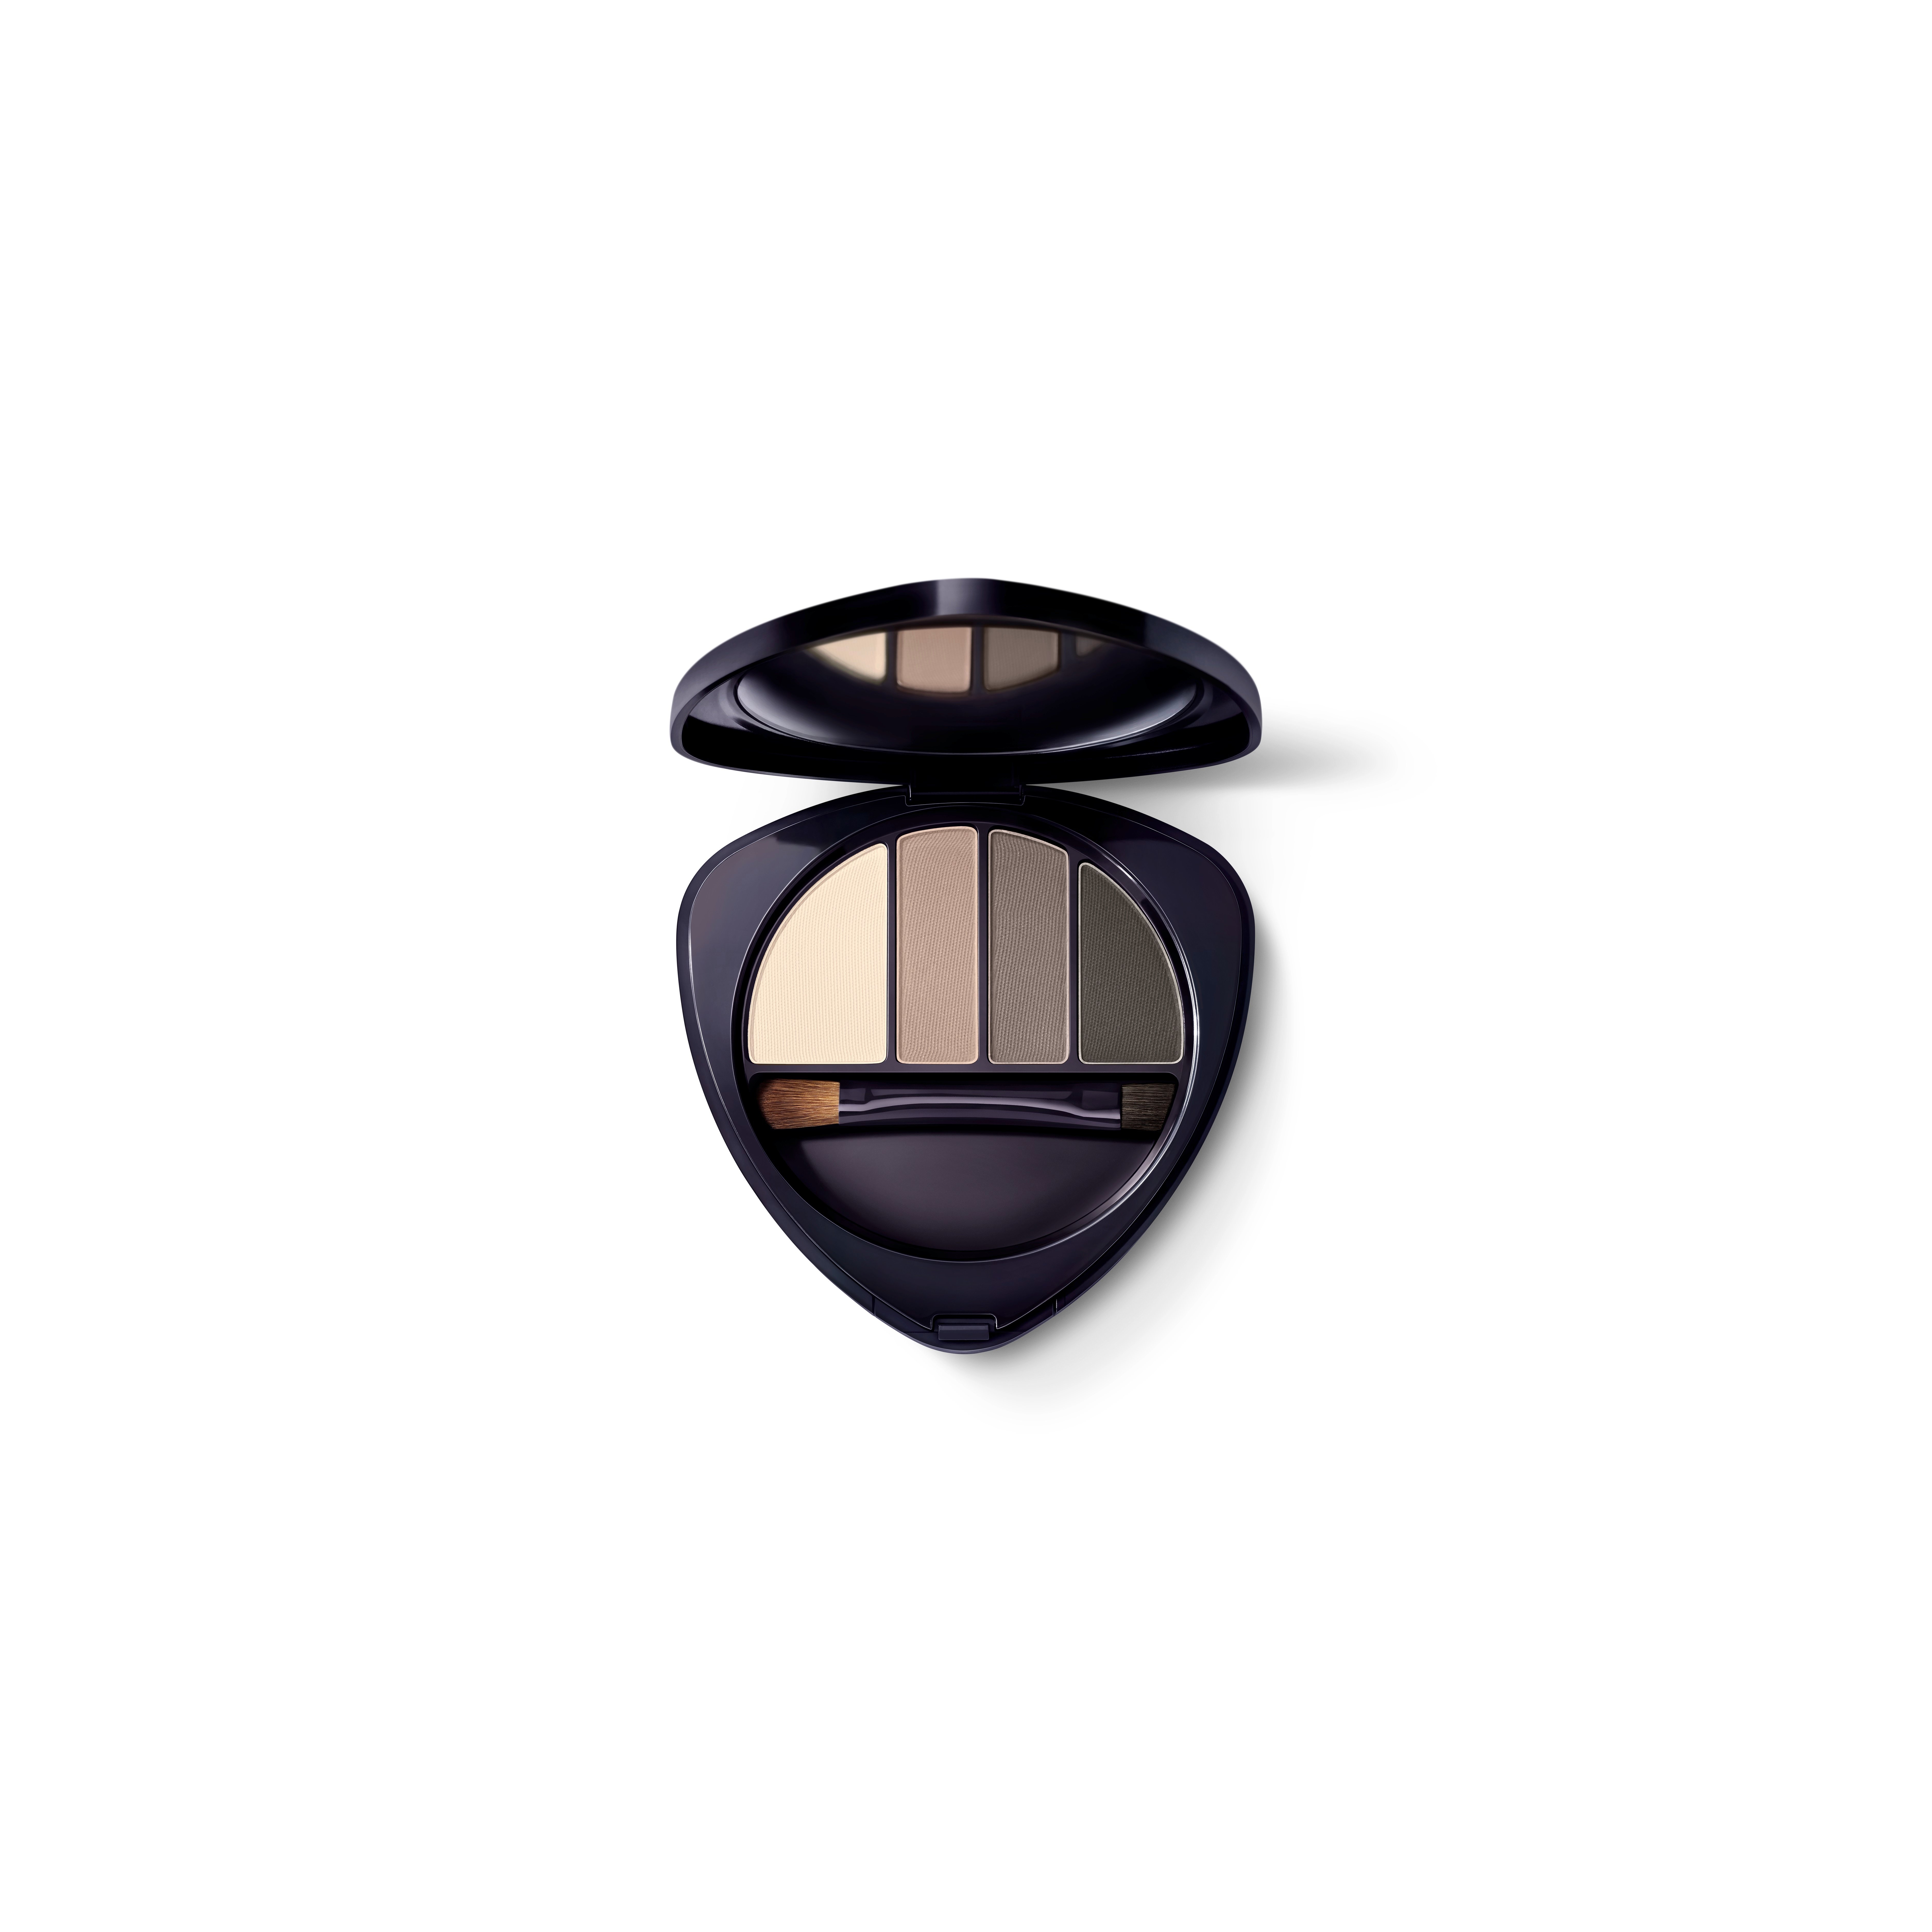 Dr. Hauschka - Eye And Brow Palette 01 Stone 5.3 g